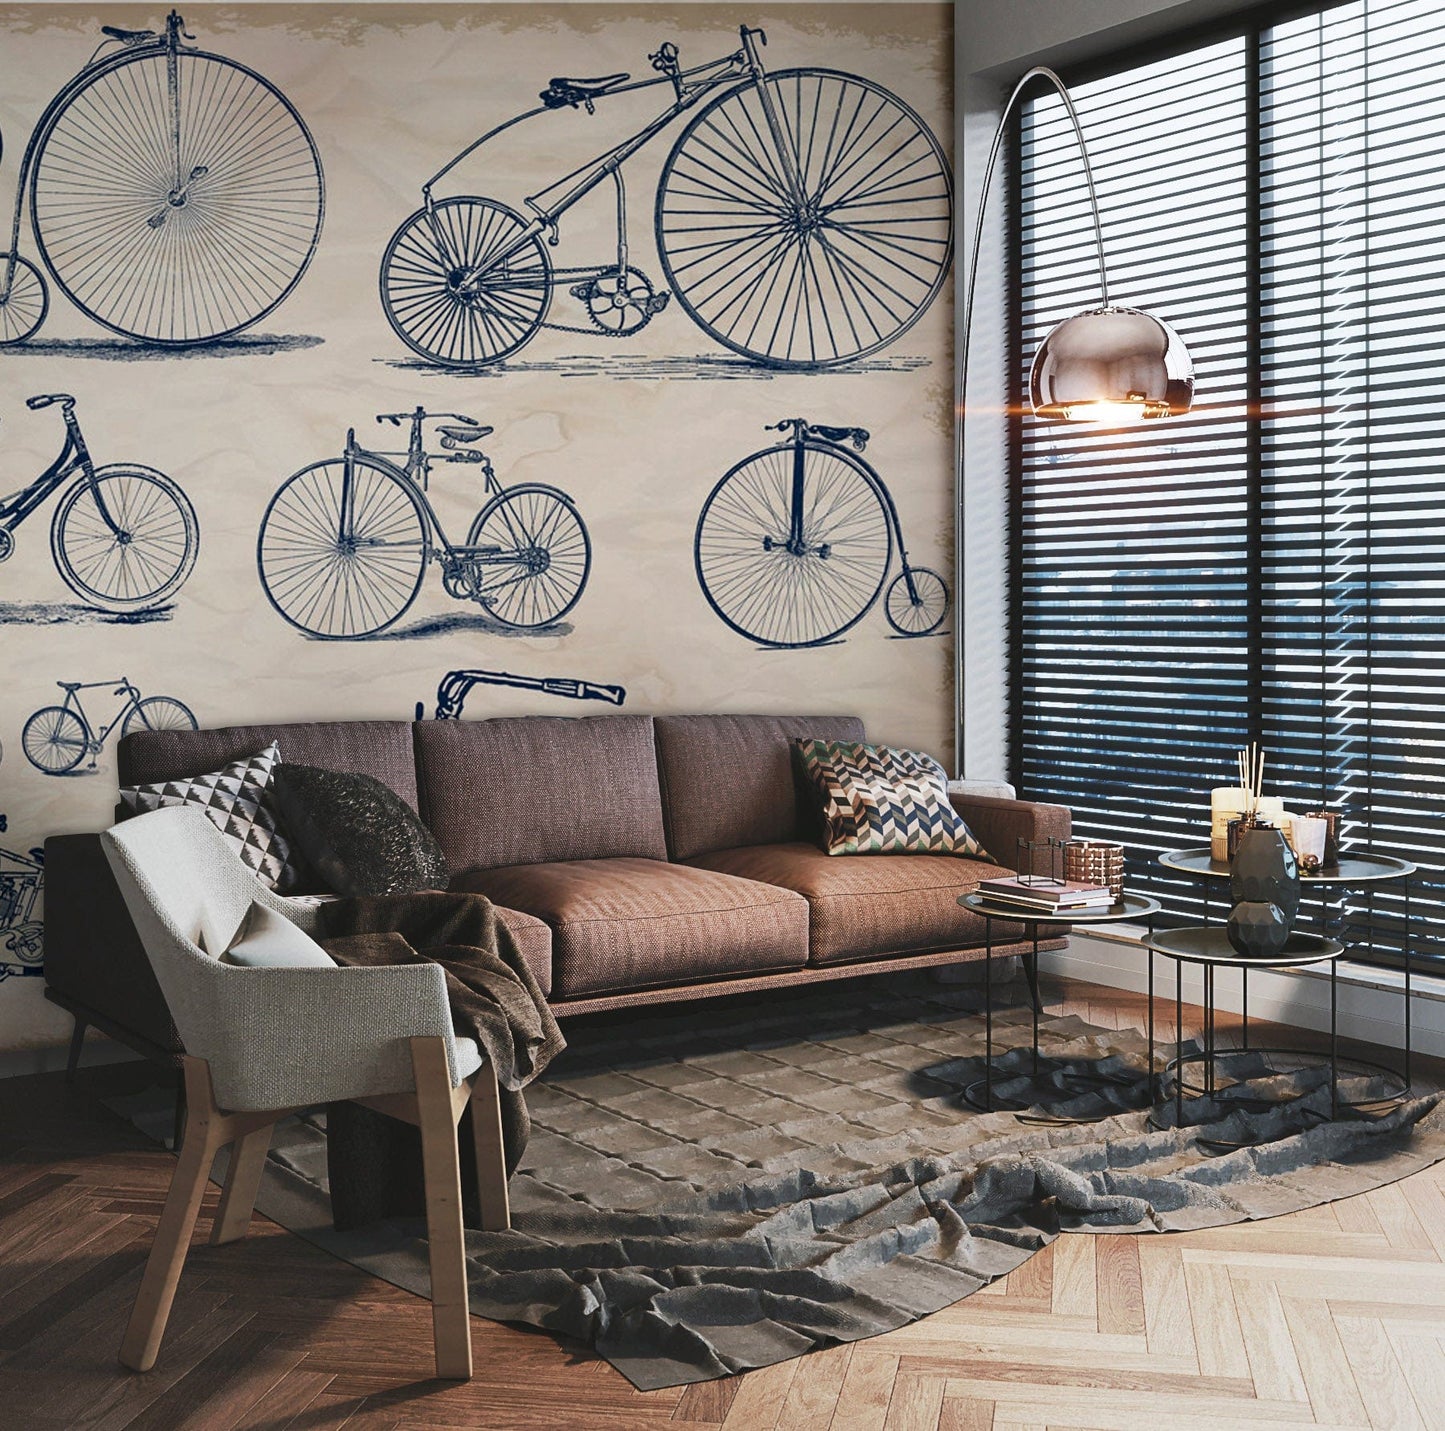 Bicycle Revolution Industrial Wallpaper Mural for Use as a Decoration in the Living Room